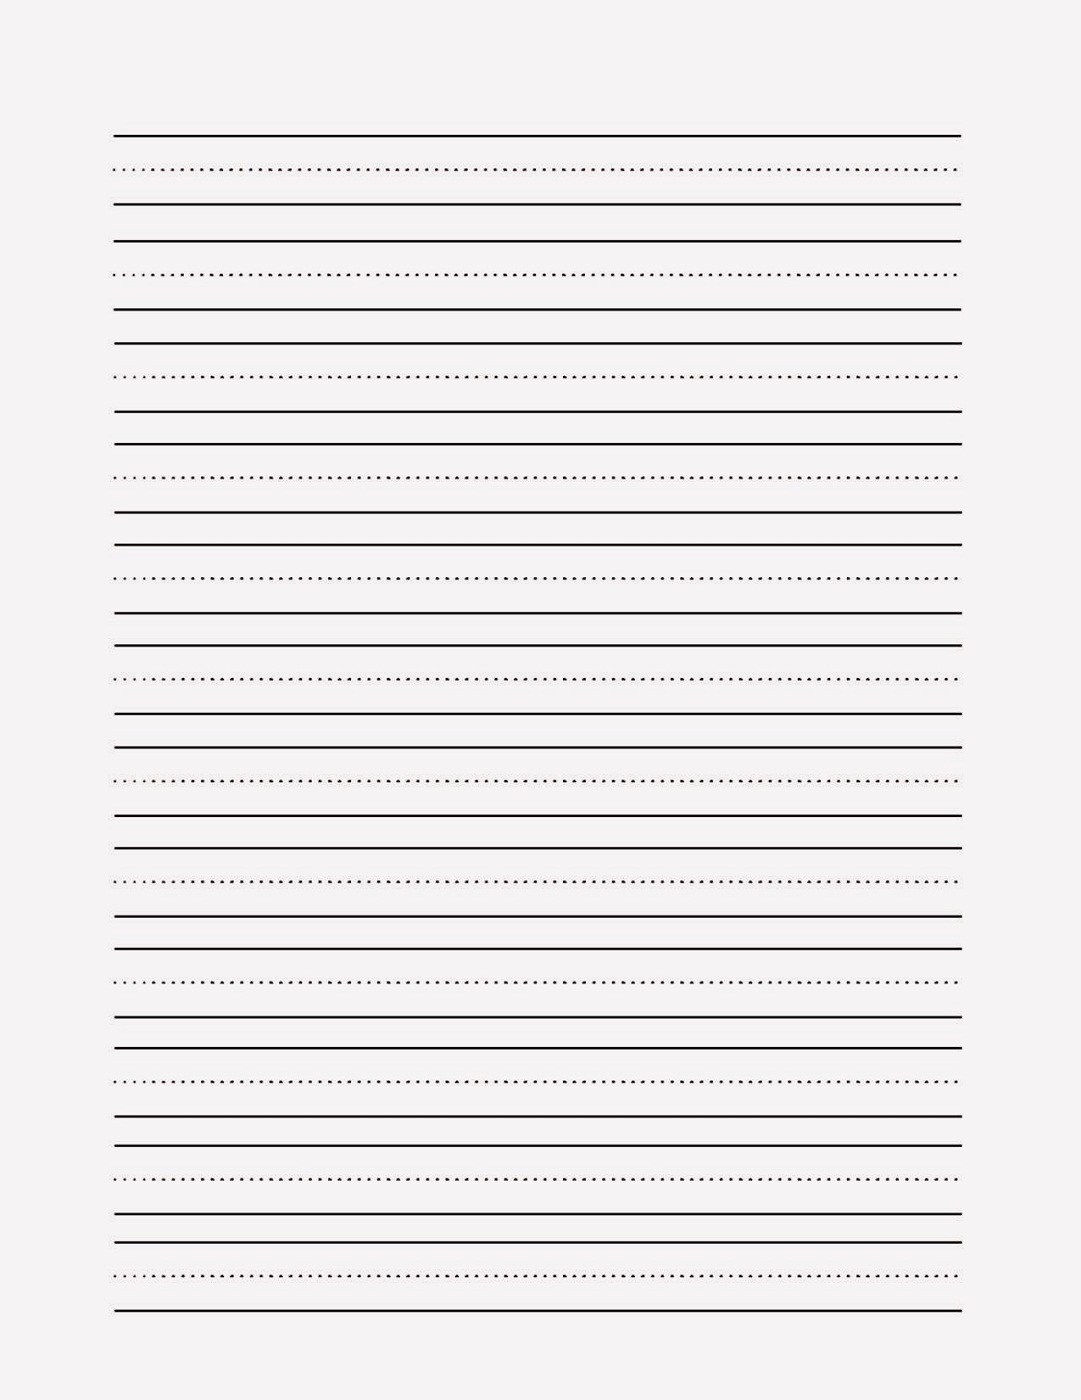 lined paper for writing for work